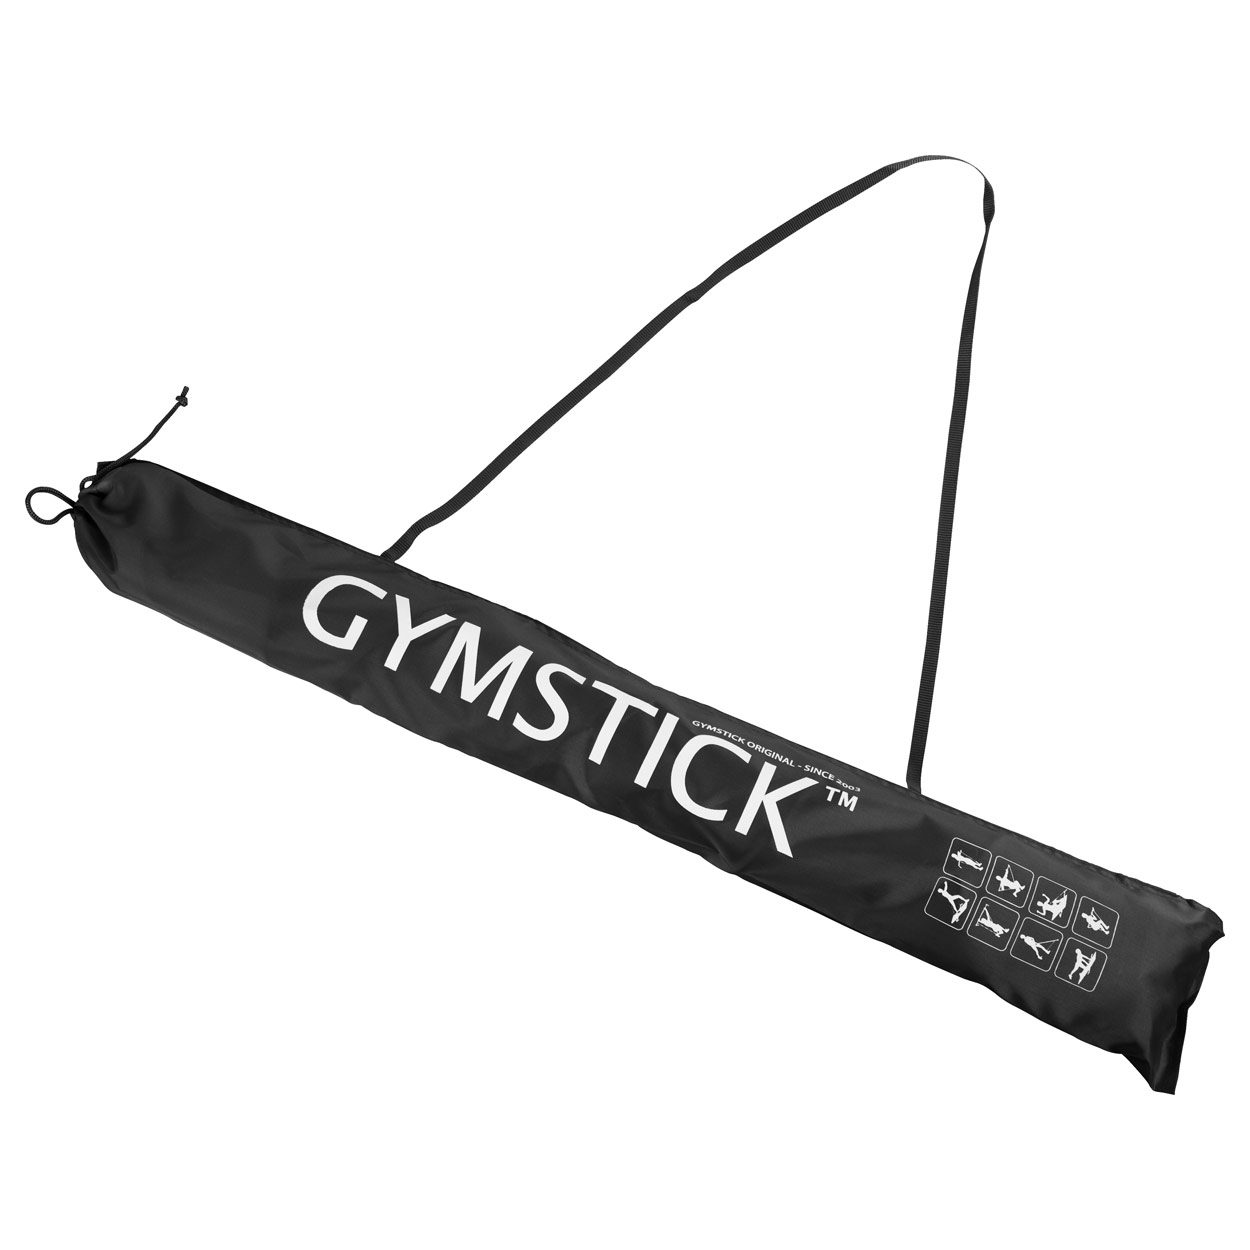 Gymstick incl. bag, Sport-Tec online buy | carrying strong, black